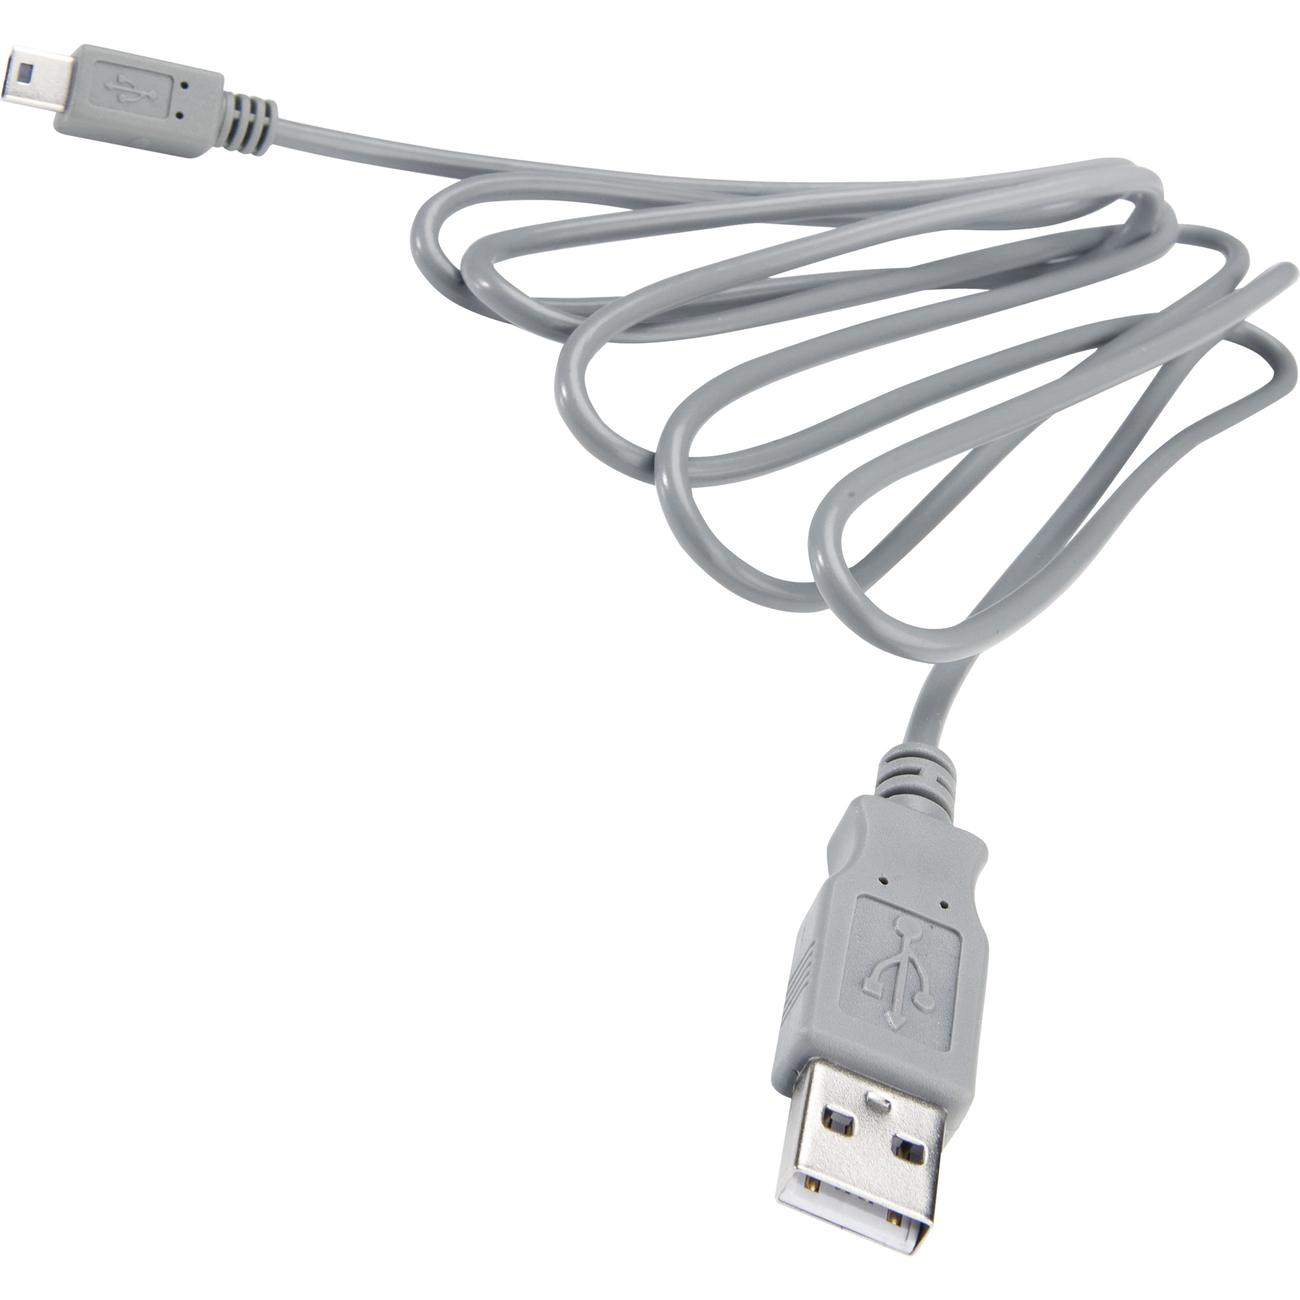 Veho USB Cable, Charge and Record at Once